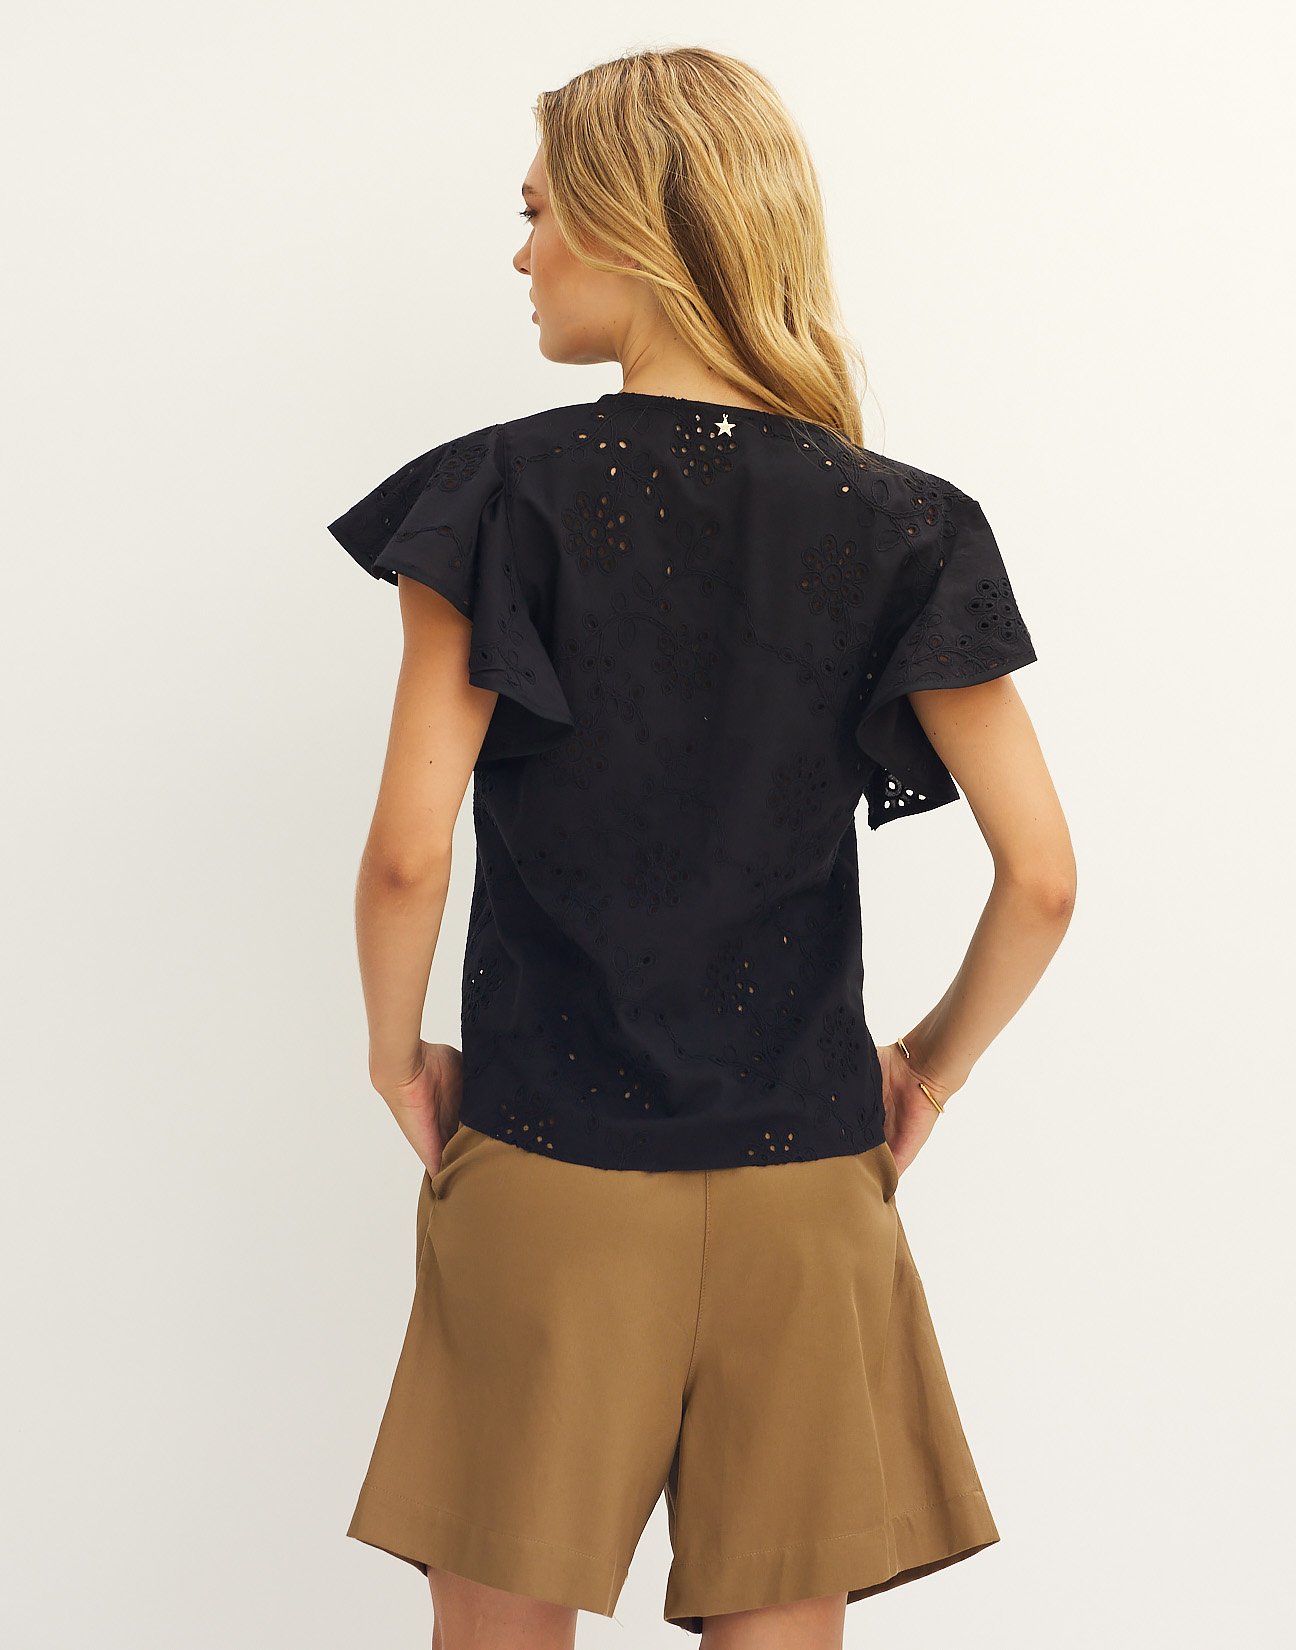 Embroidery top with zip